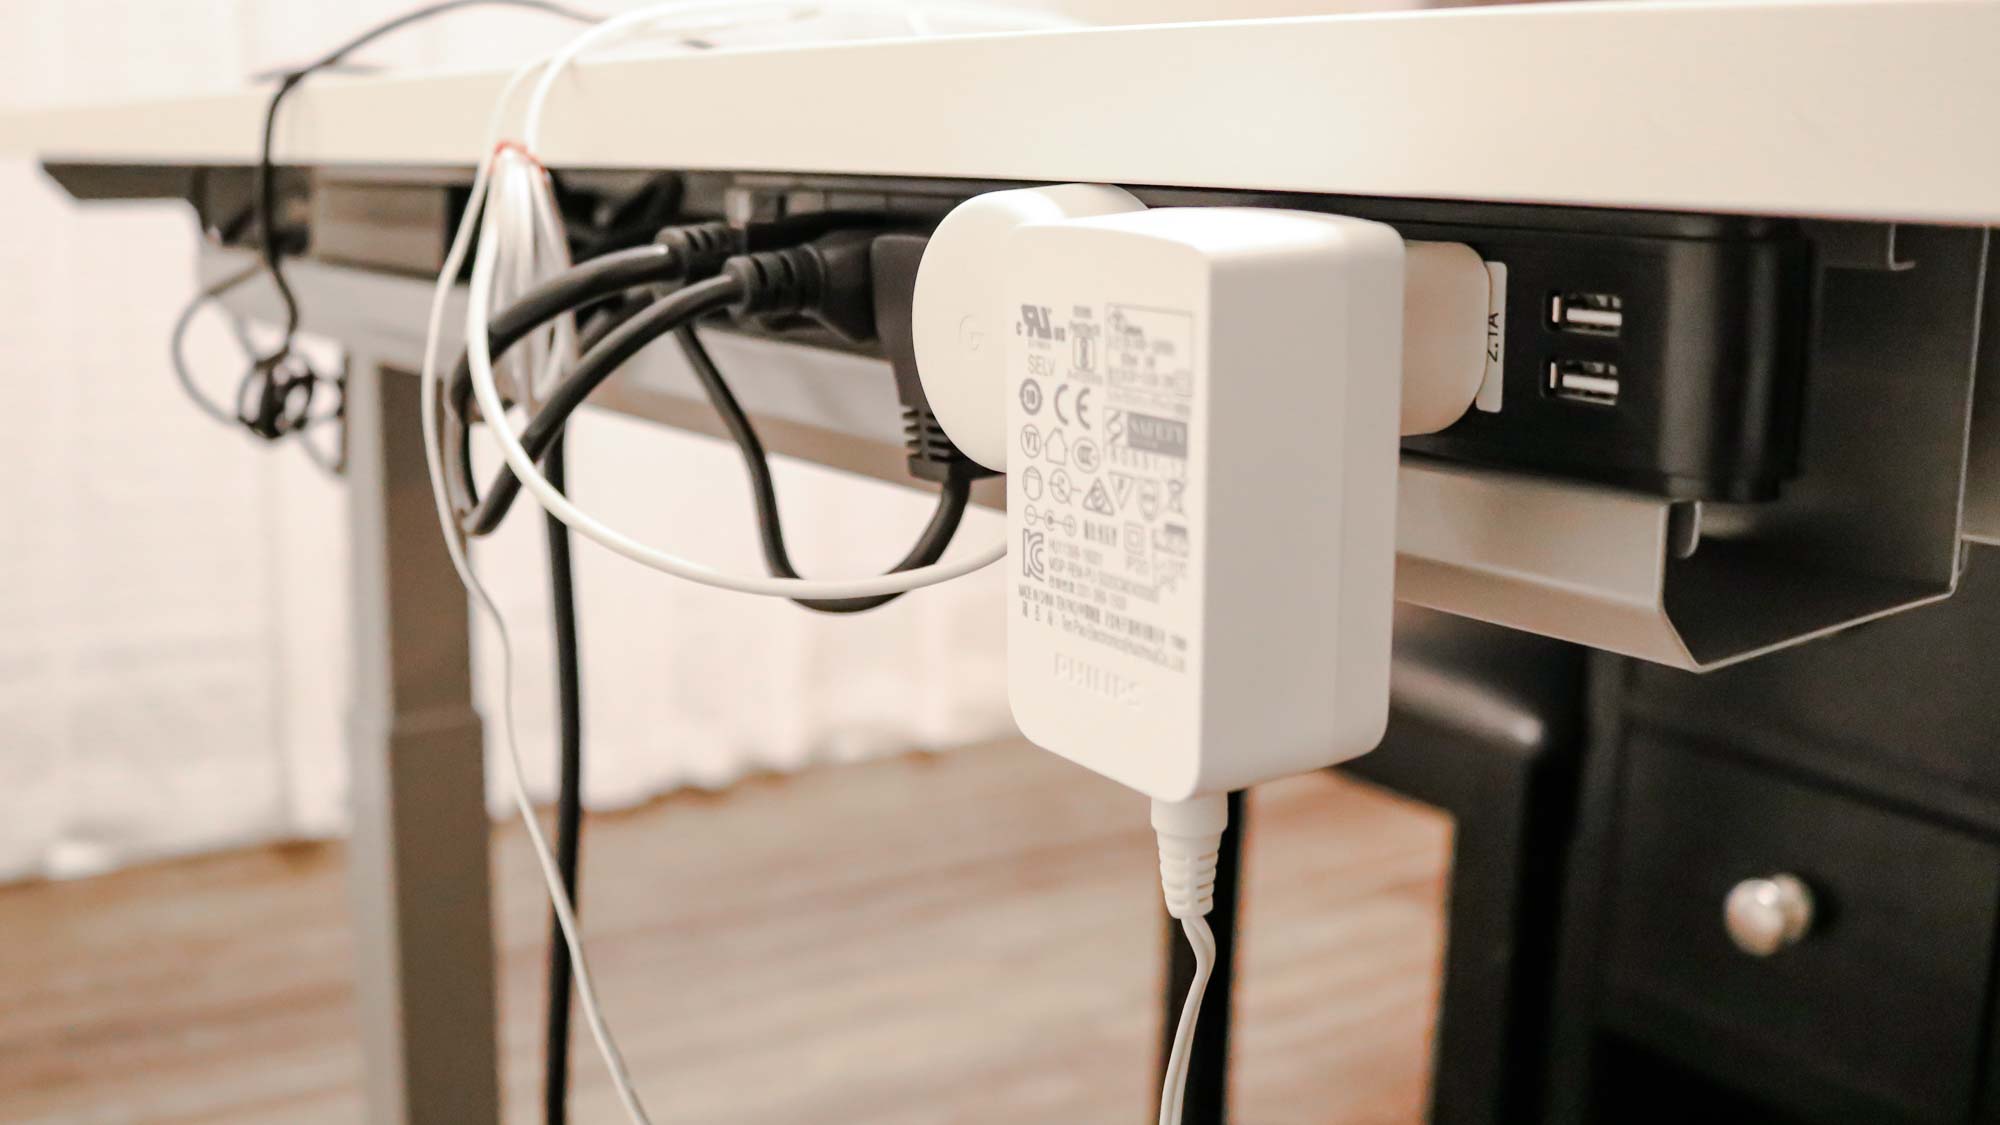 Cable management tray with power strip that connects to multiple devices